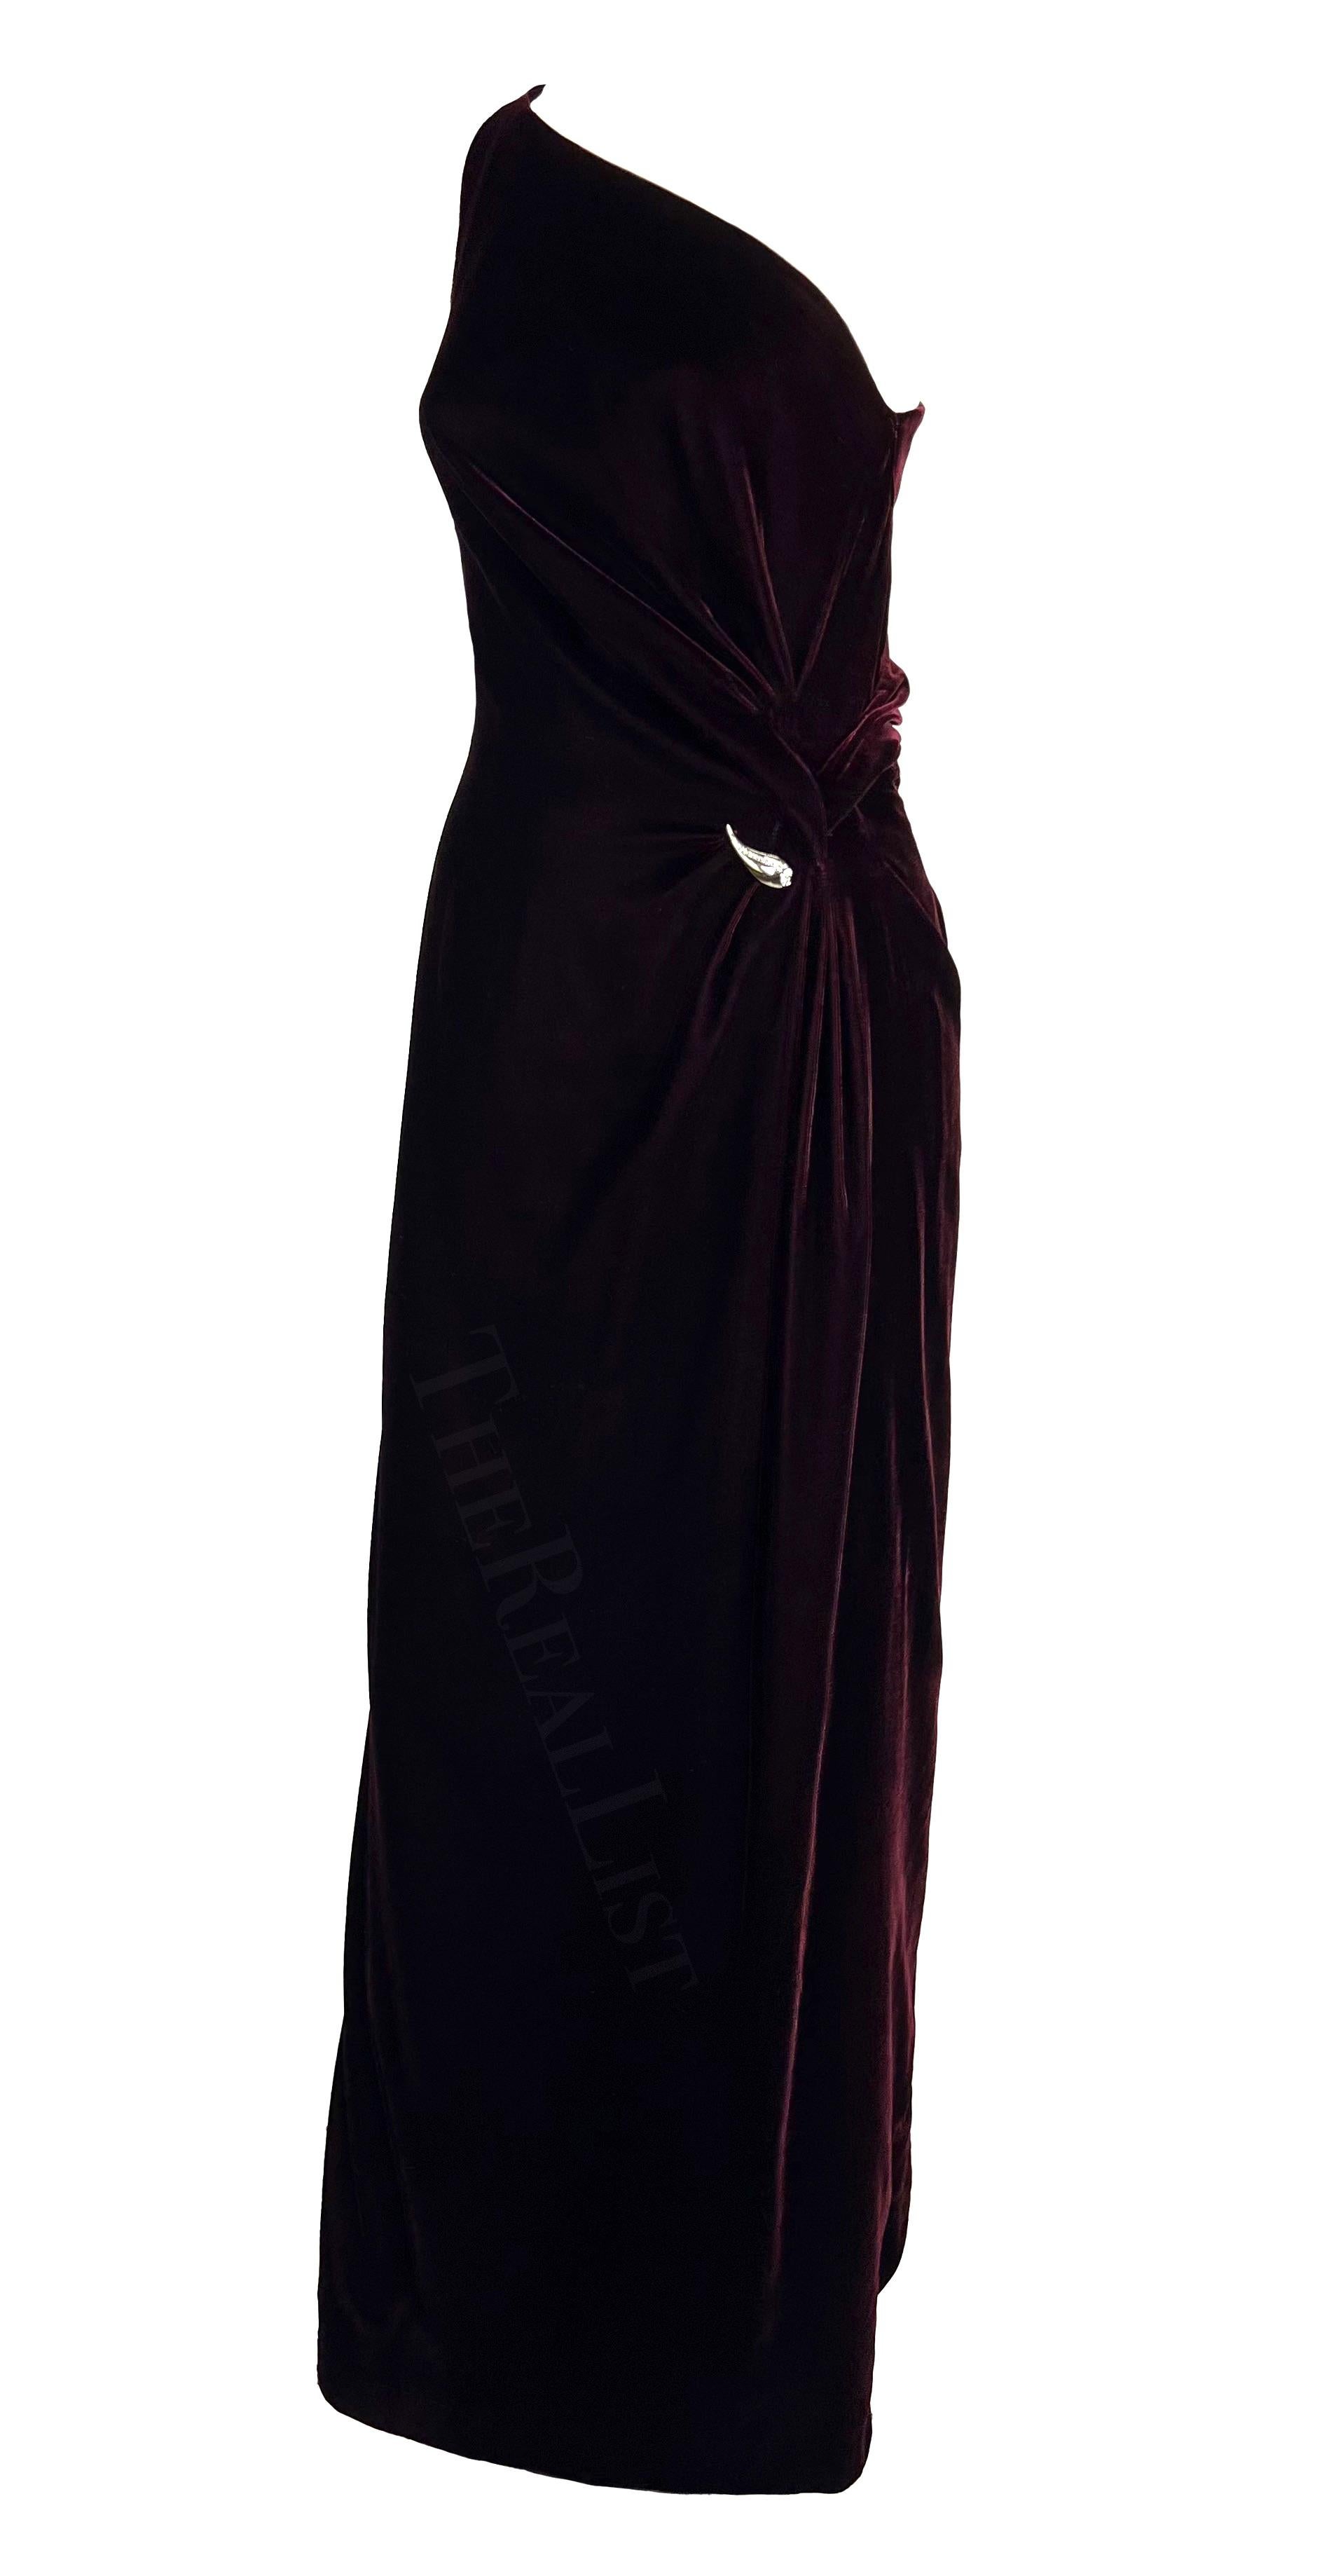 Presenting an incredible deep burgundy Thierry Mugler velvet gown, designed by Manfred Mugler. From the Fall/Winter 2000 collection, this dress debuted on the season's runway in dark green. Constructed entirely of luxurious velvet, this floor-length